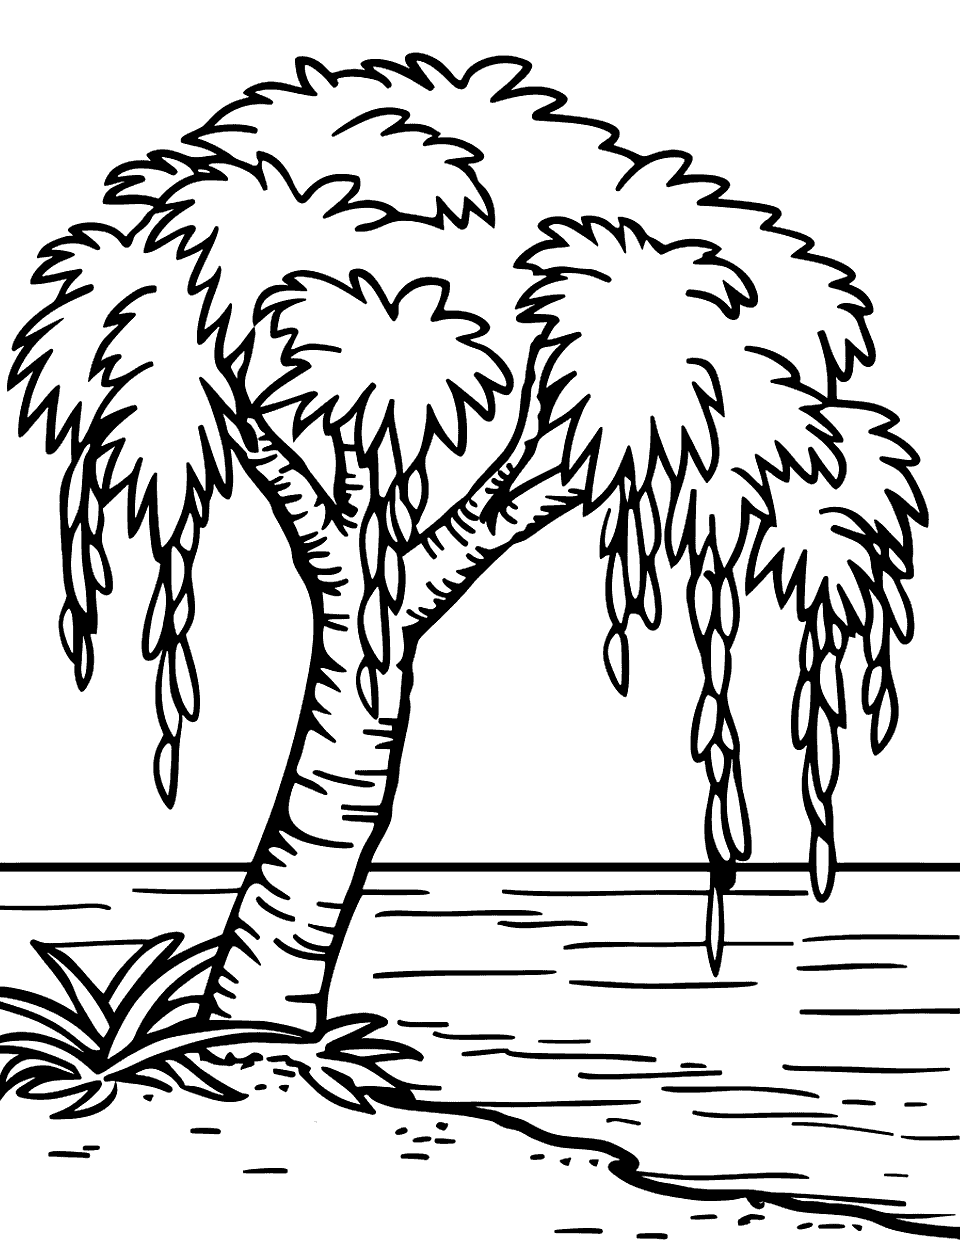 Willow by the Water Coloring Page - A weeping willow tree beside a calm lake.